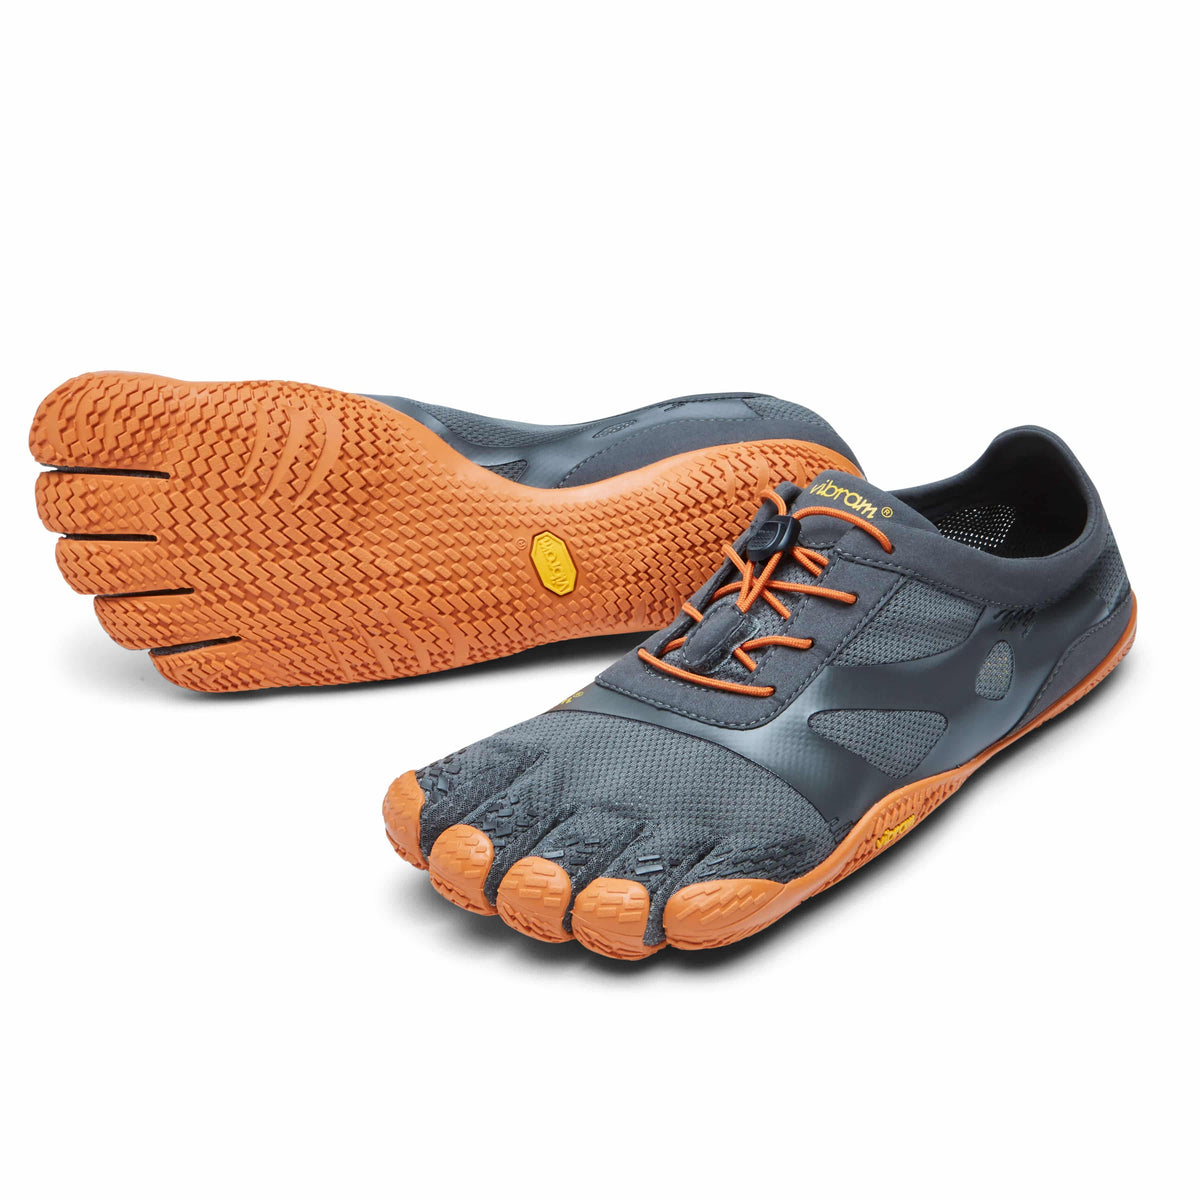 The Home Of Vibrams Fivefingers Barefoot